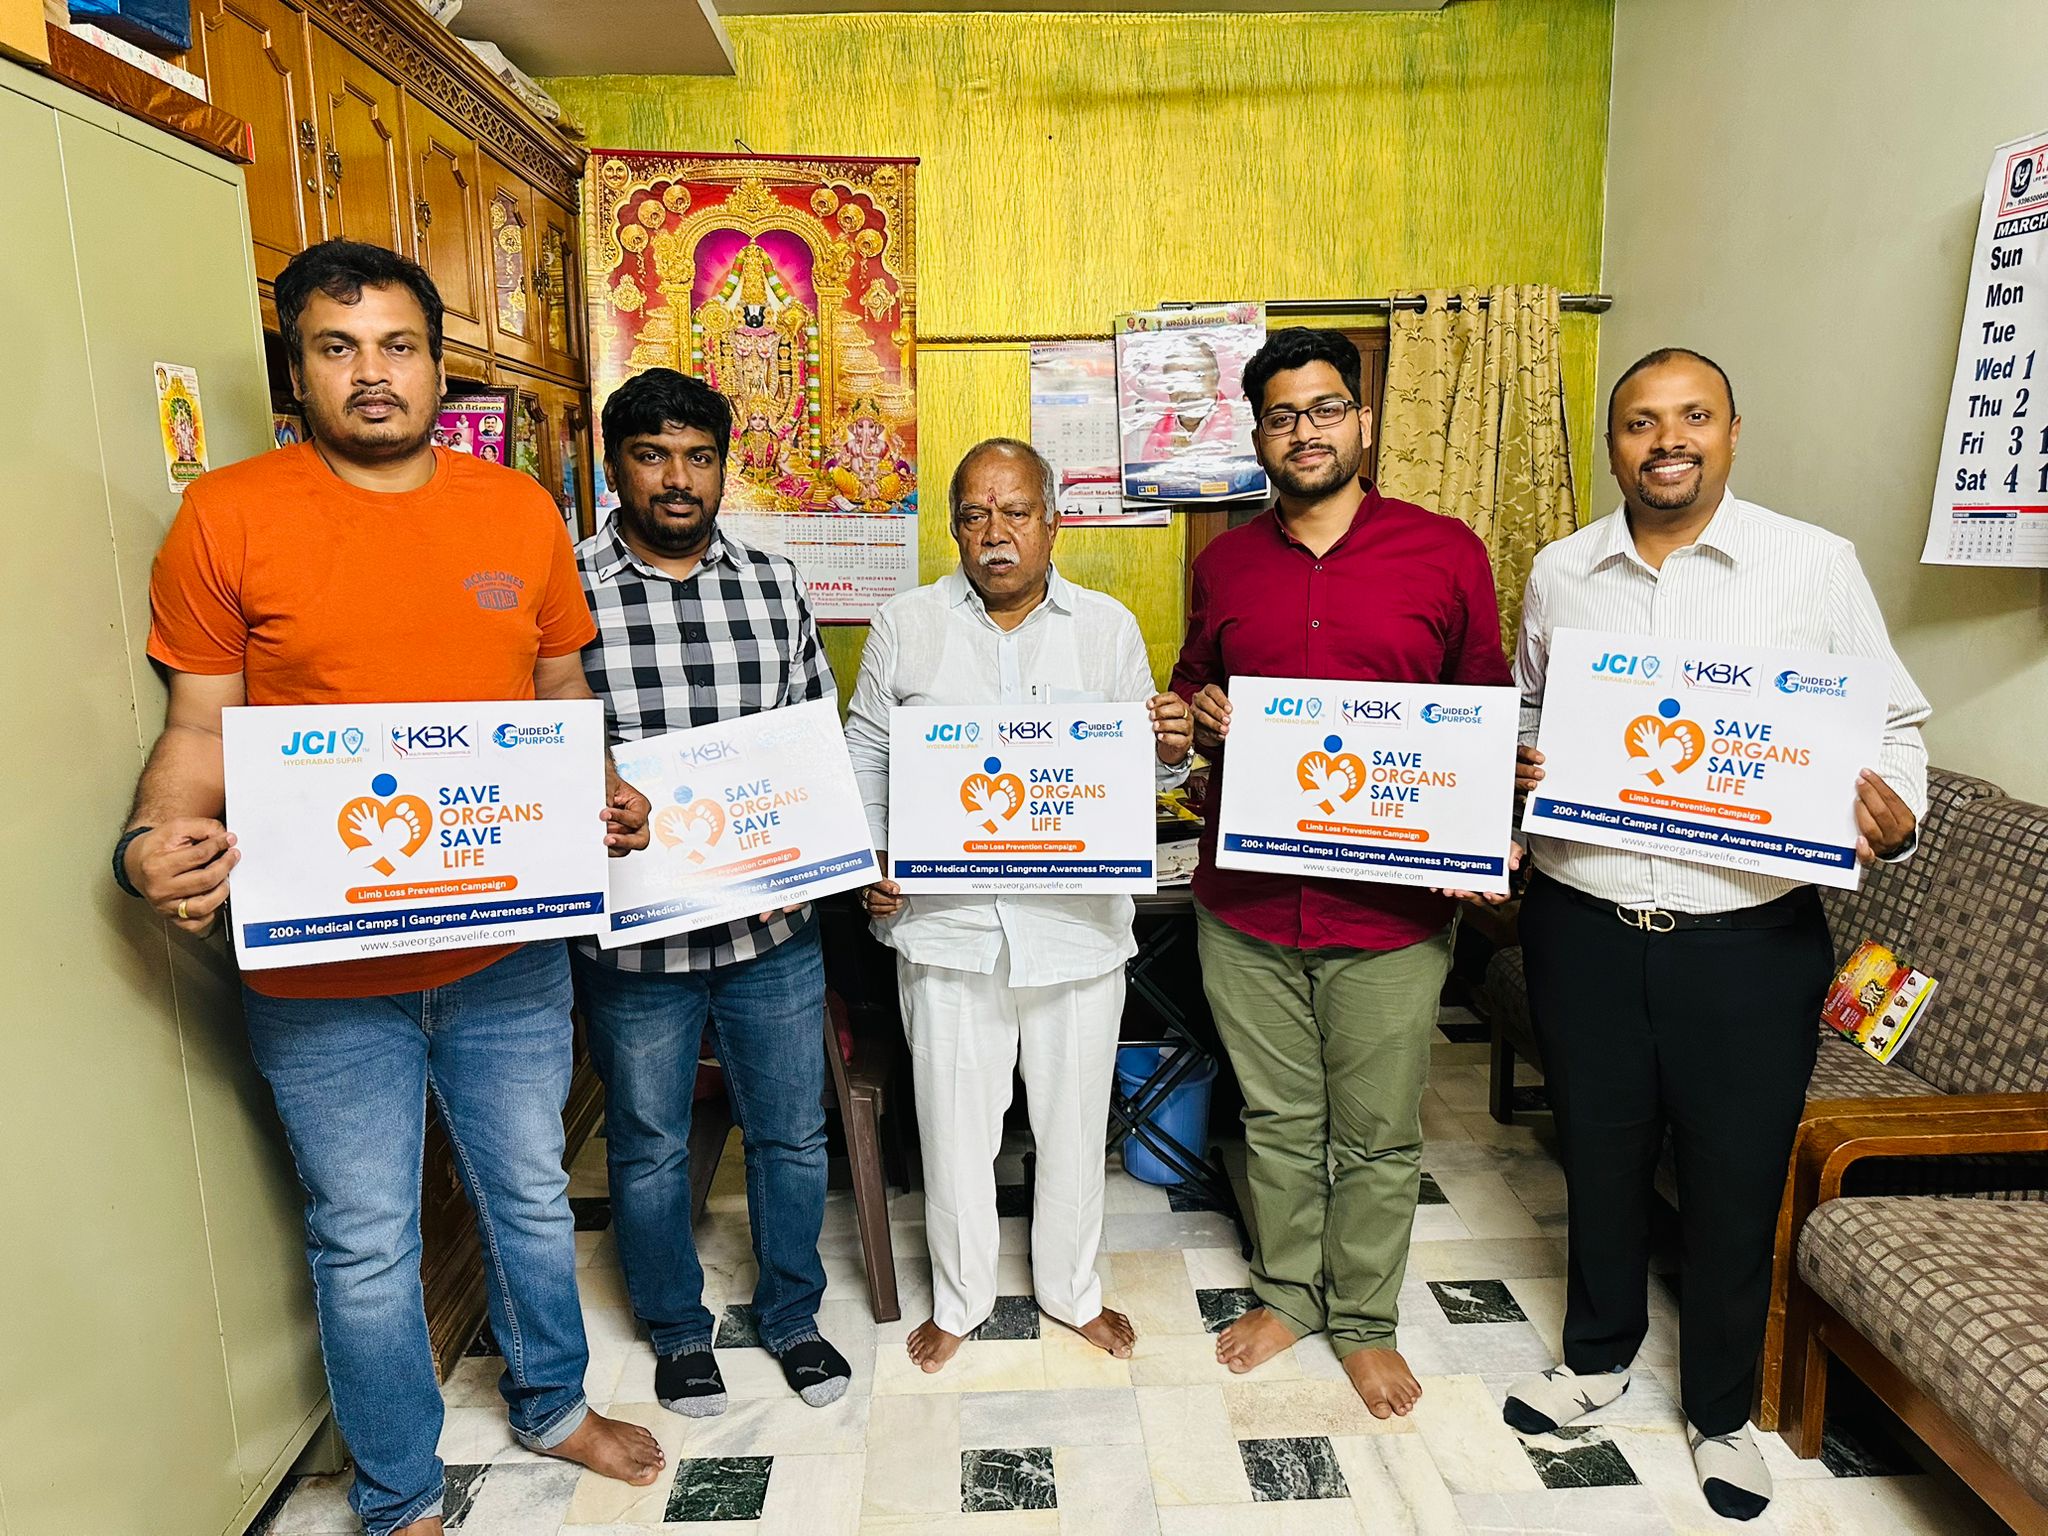 𝗠𝗿. 𝗕𝗼𝗴𝗴𝗮𝗿𝗮𝗽𝘂 𝗗𝗮𝘆𝗮𝗻𝗮𝗻𝗱 (𝗠.𝗟.𝗖 BRS Party) unveils save organs save life poster